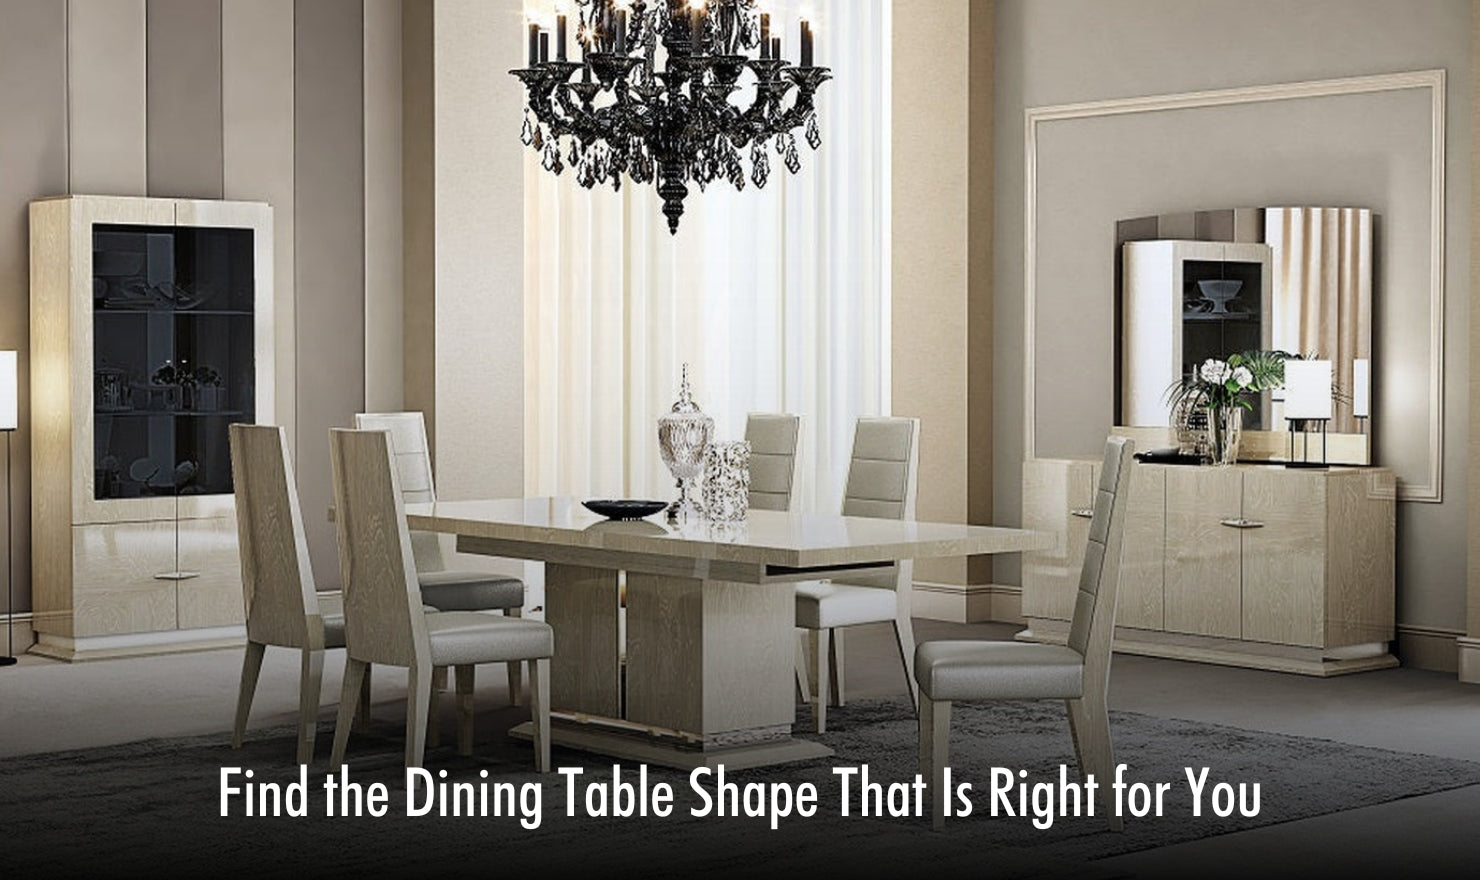 Find the Dining Table Shape That Is Right for You